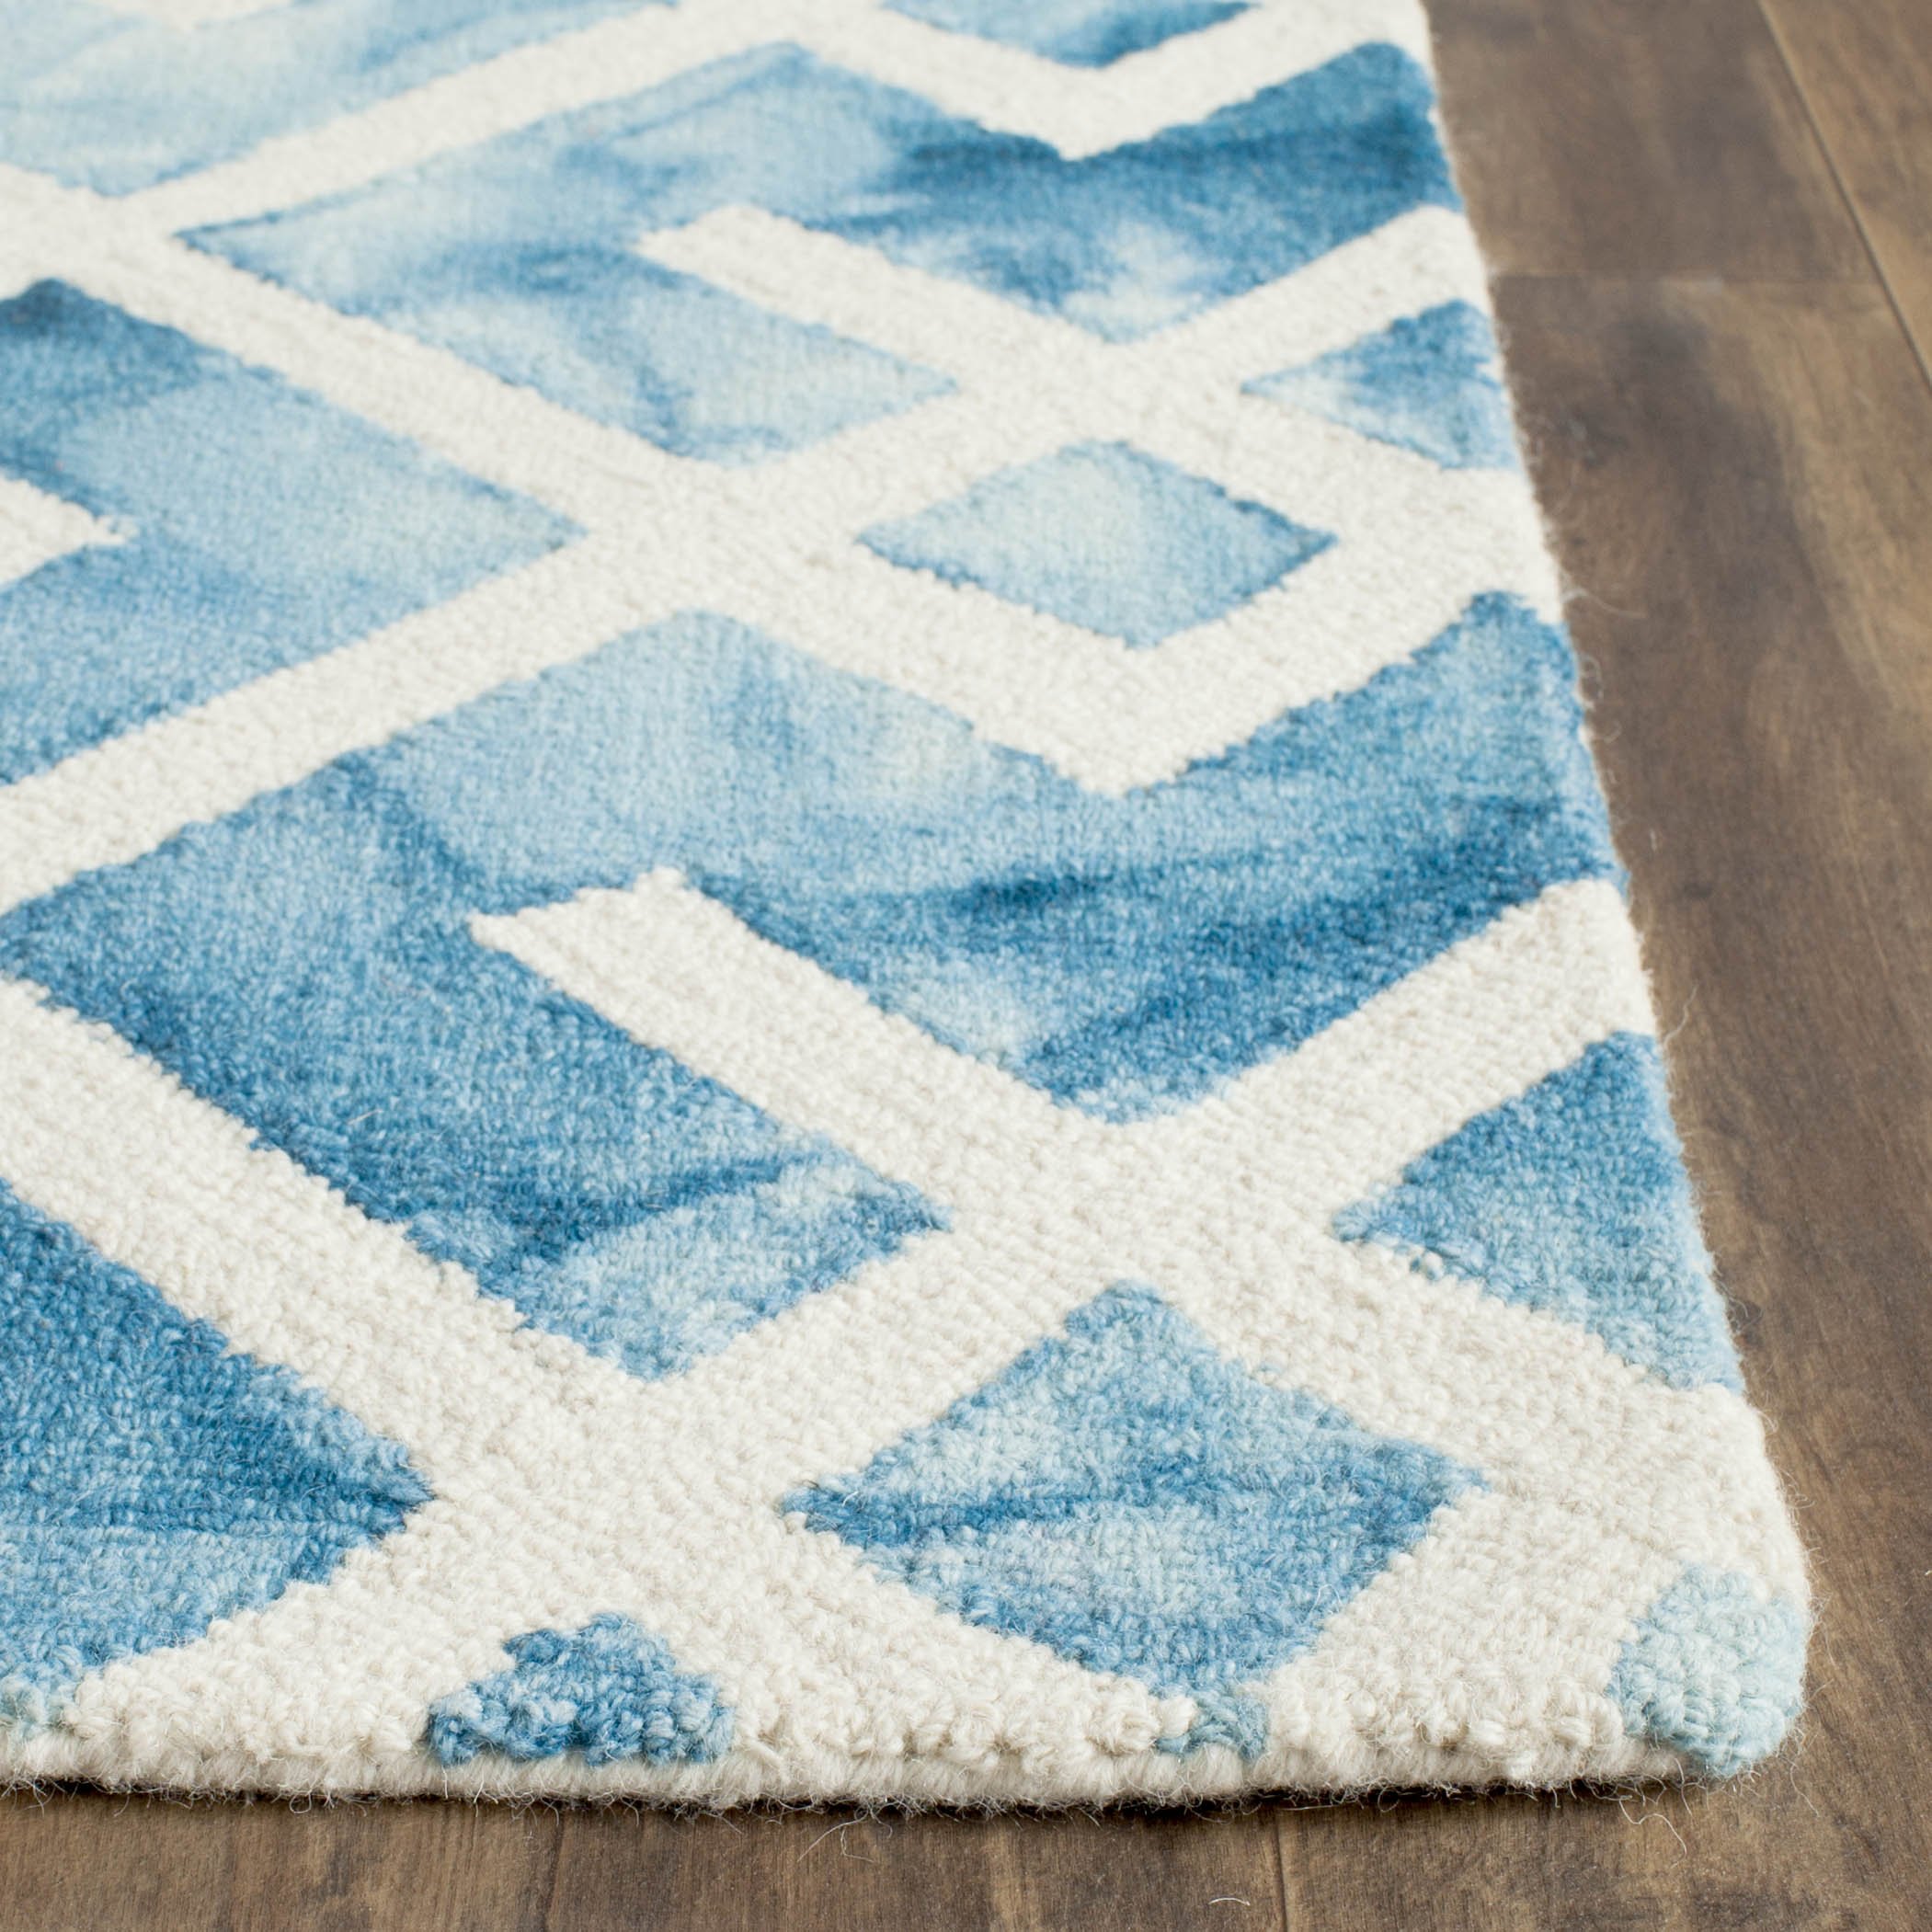 SAFAVIEH Dip Dye Collection 2' x 3' Blue/Ivory DDY677G Handmade Moroccan Watercolor Premium Wool Accent Rug